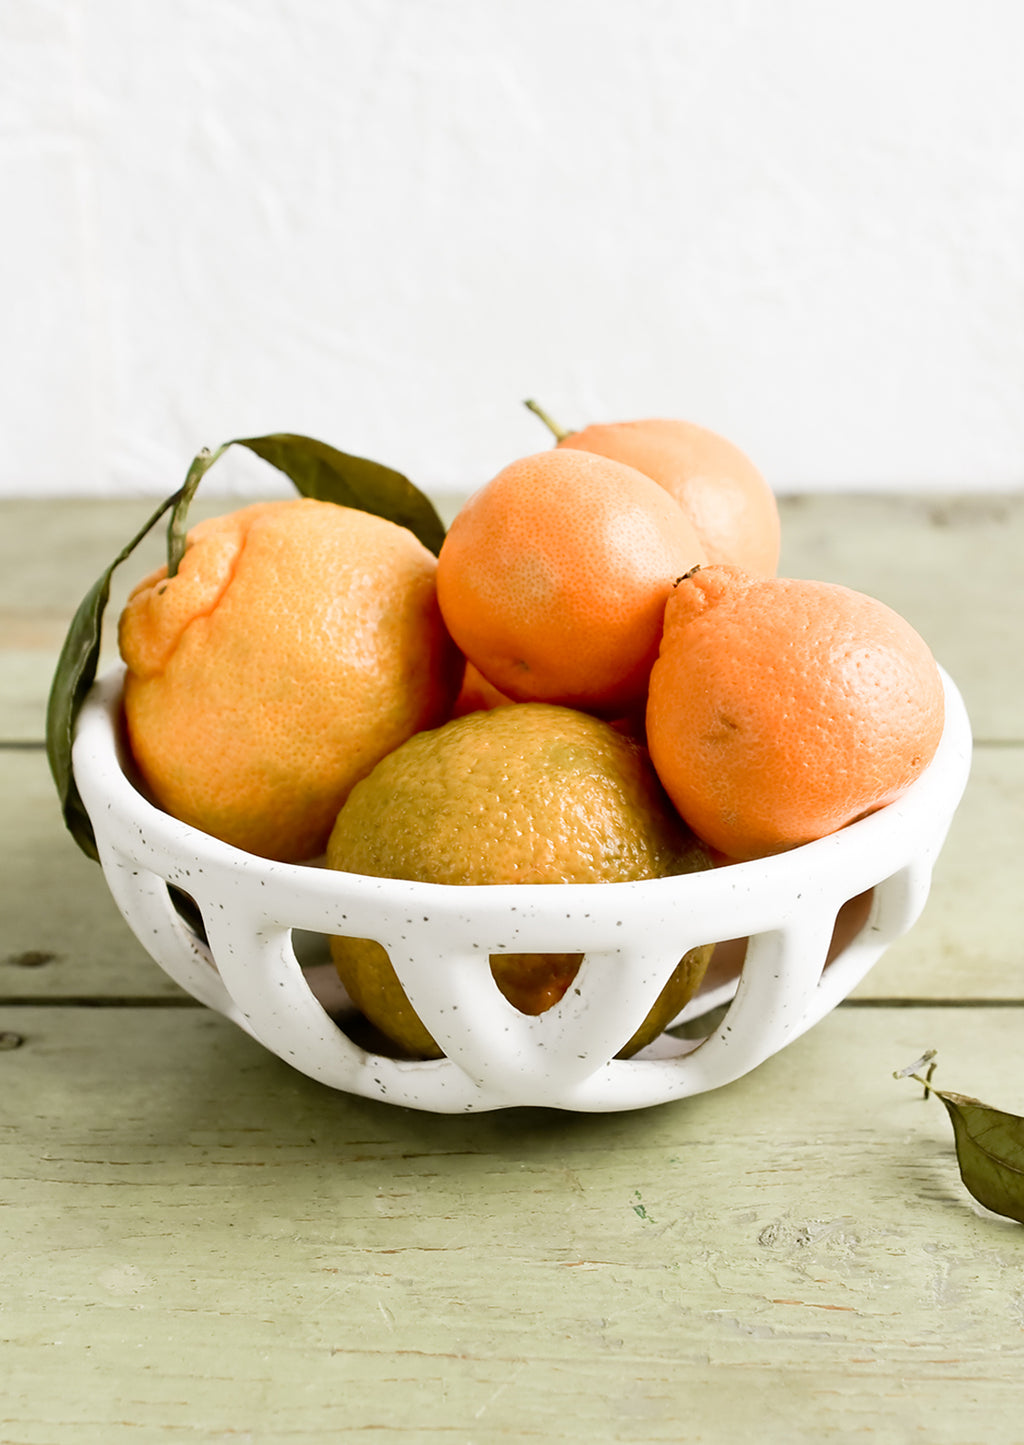 Small: A white ceramic fruit bowl with clementines.